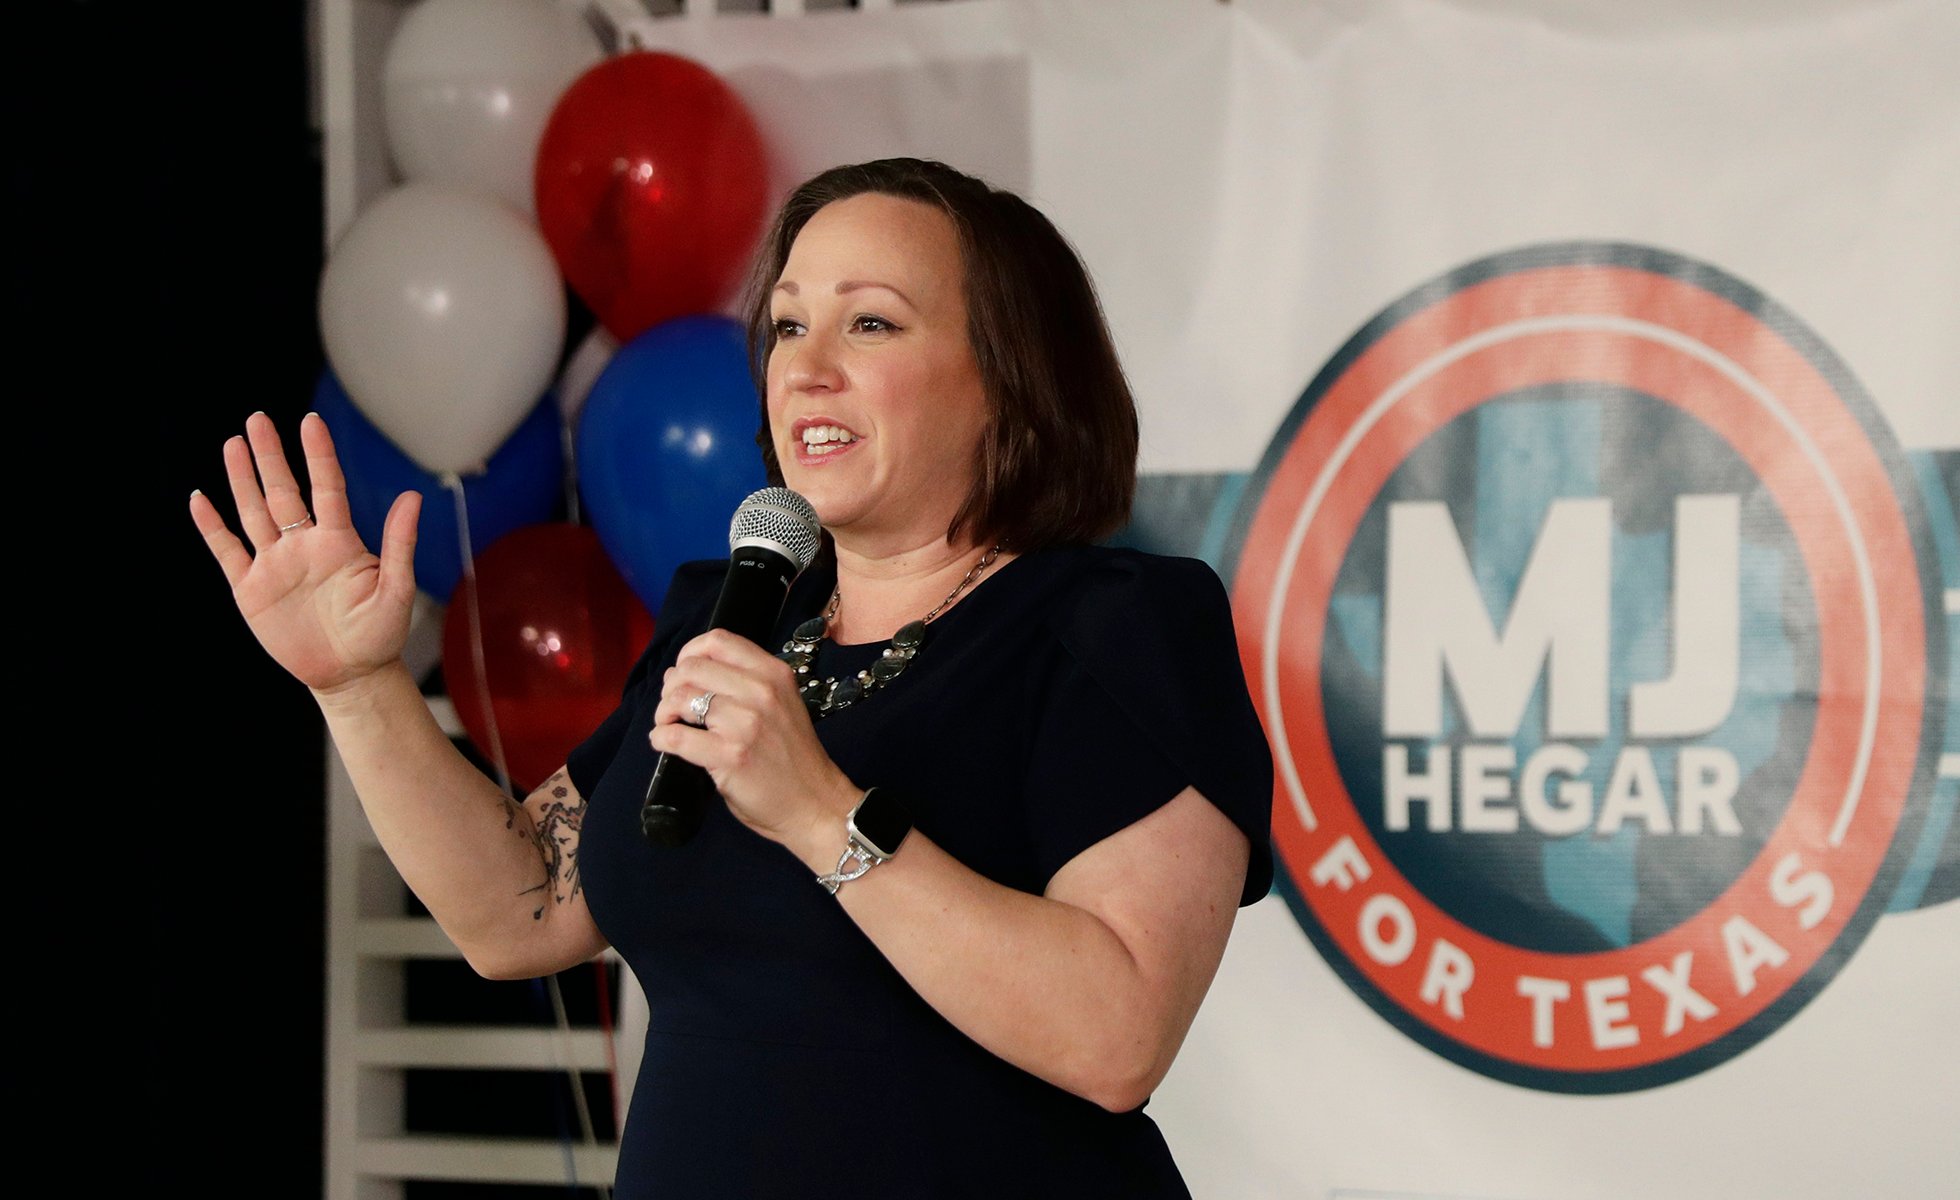 Democratic U.S. Senate candidate MJ Hegar speaks to supporters during her election night party in Austin, Texas, Tuesday, March 3, 2020. (AP Photo/Eric Gay)